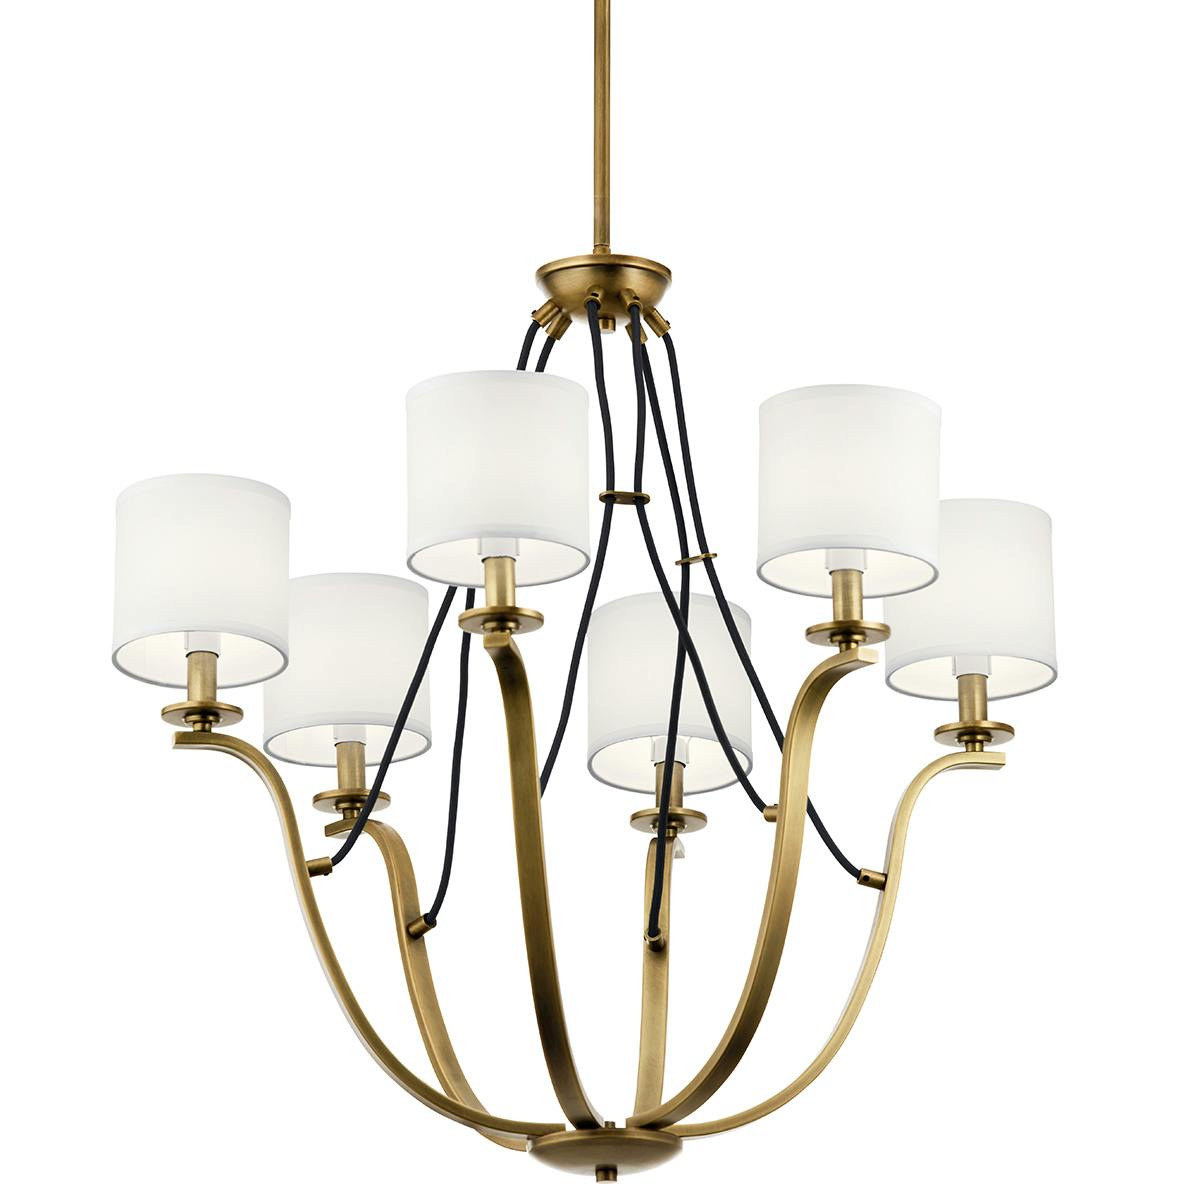 Close up view of the Thisbe 27.5" 6 Light Chandelier Brass on a white background